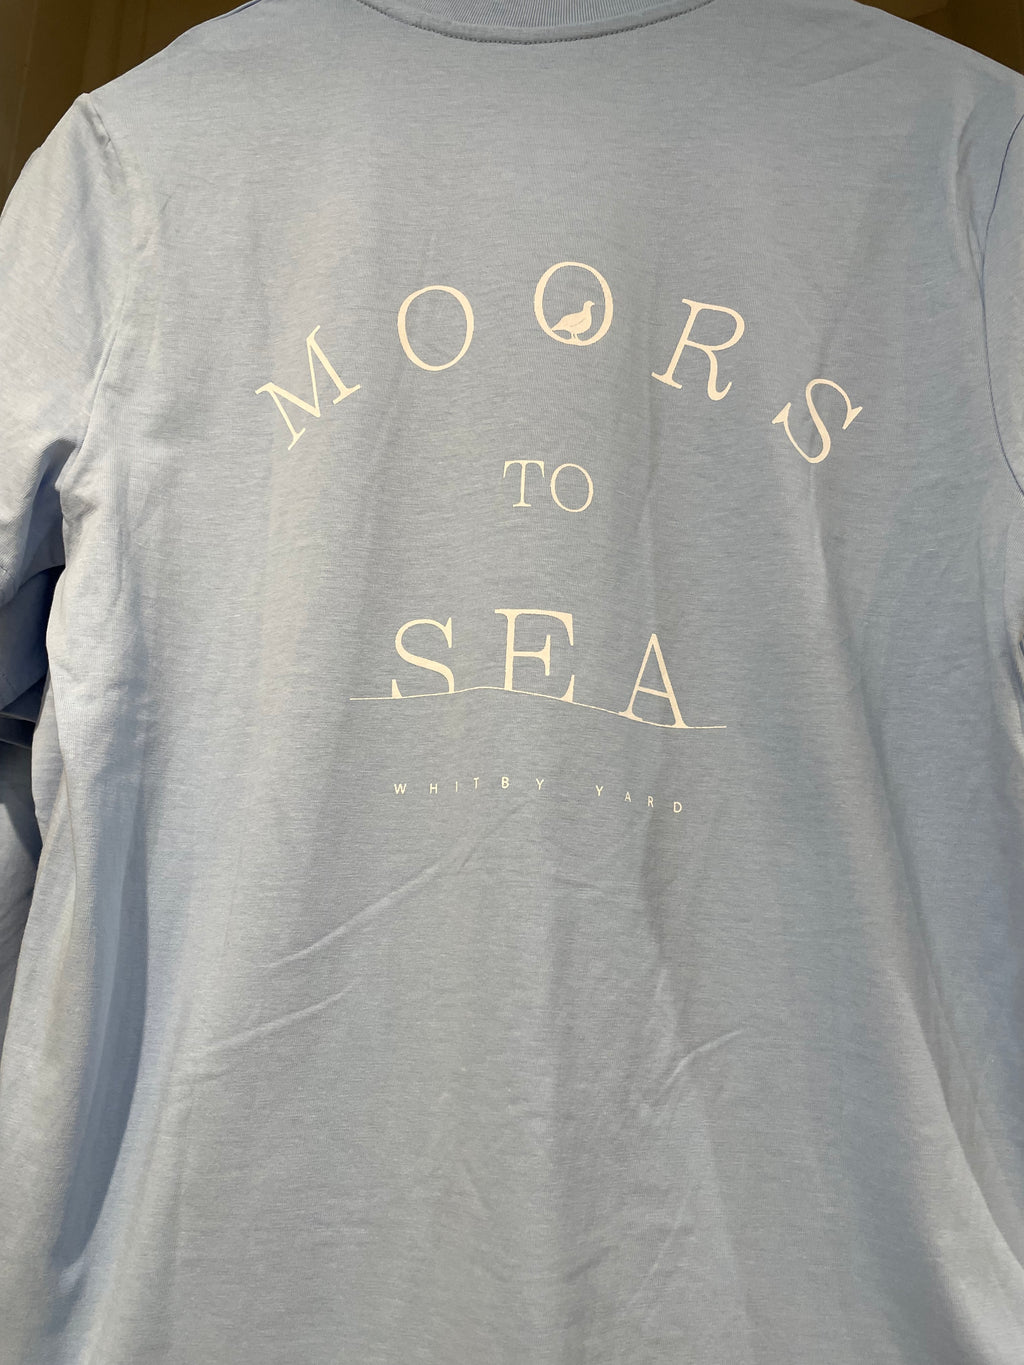 Unisex 'Moors to Sea' T shirt in Blue